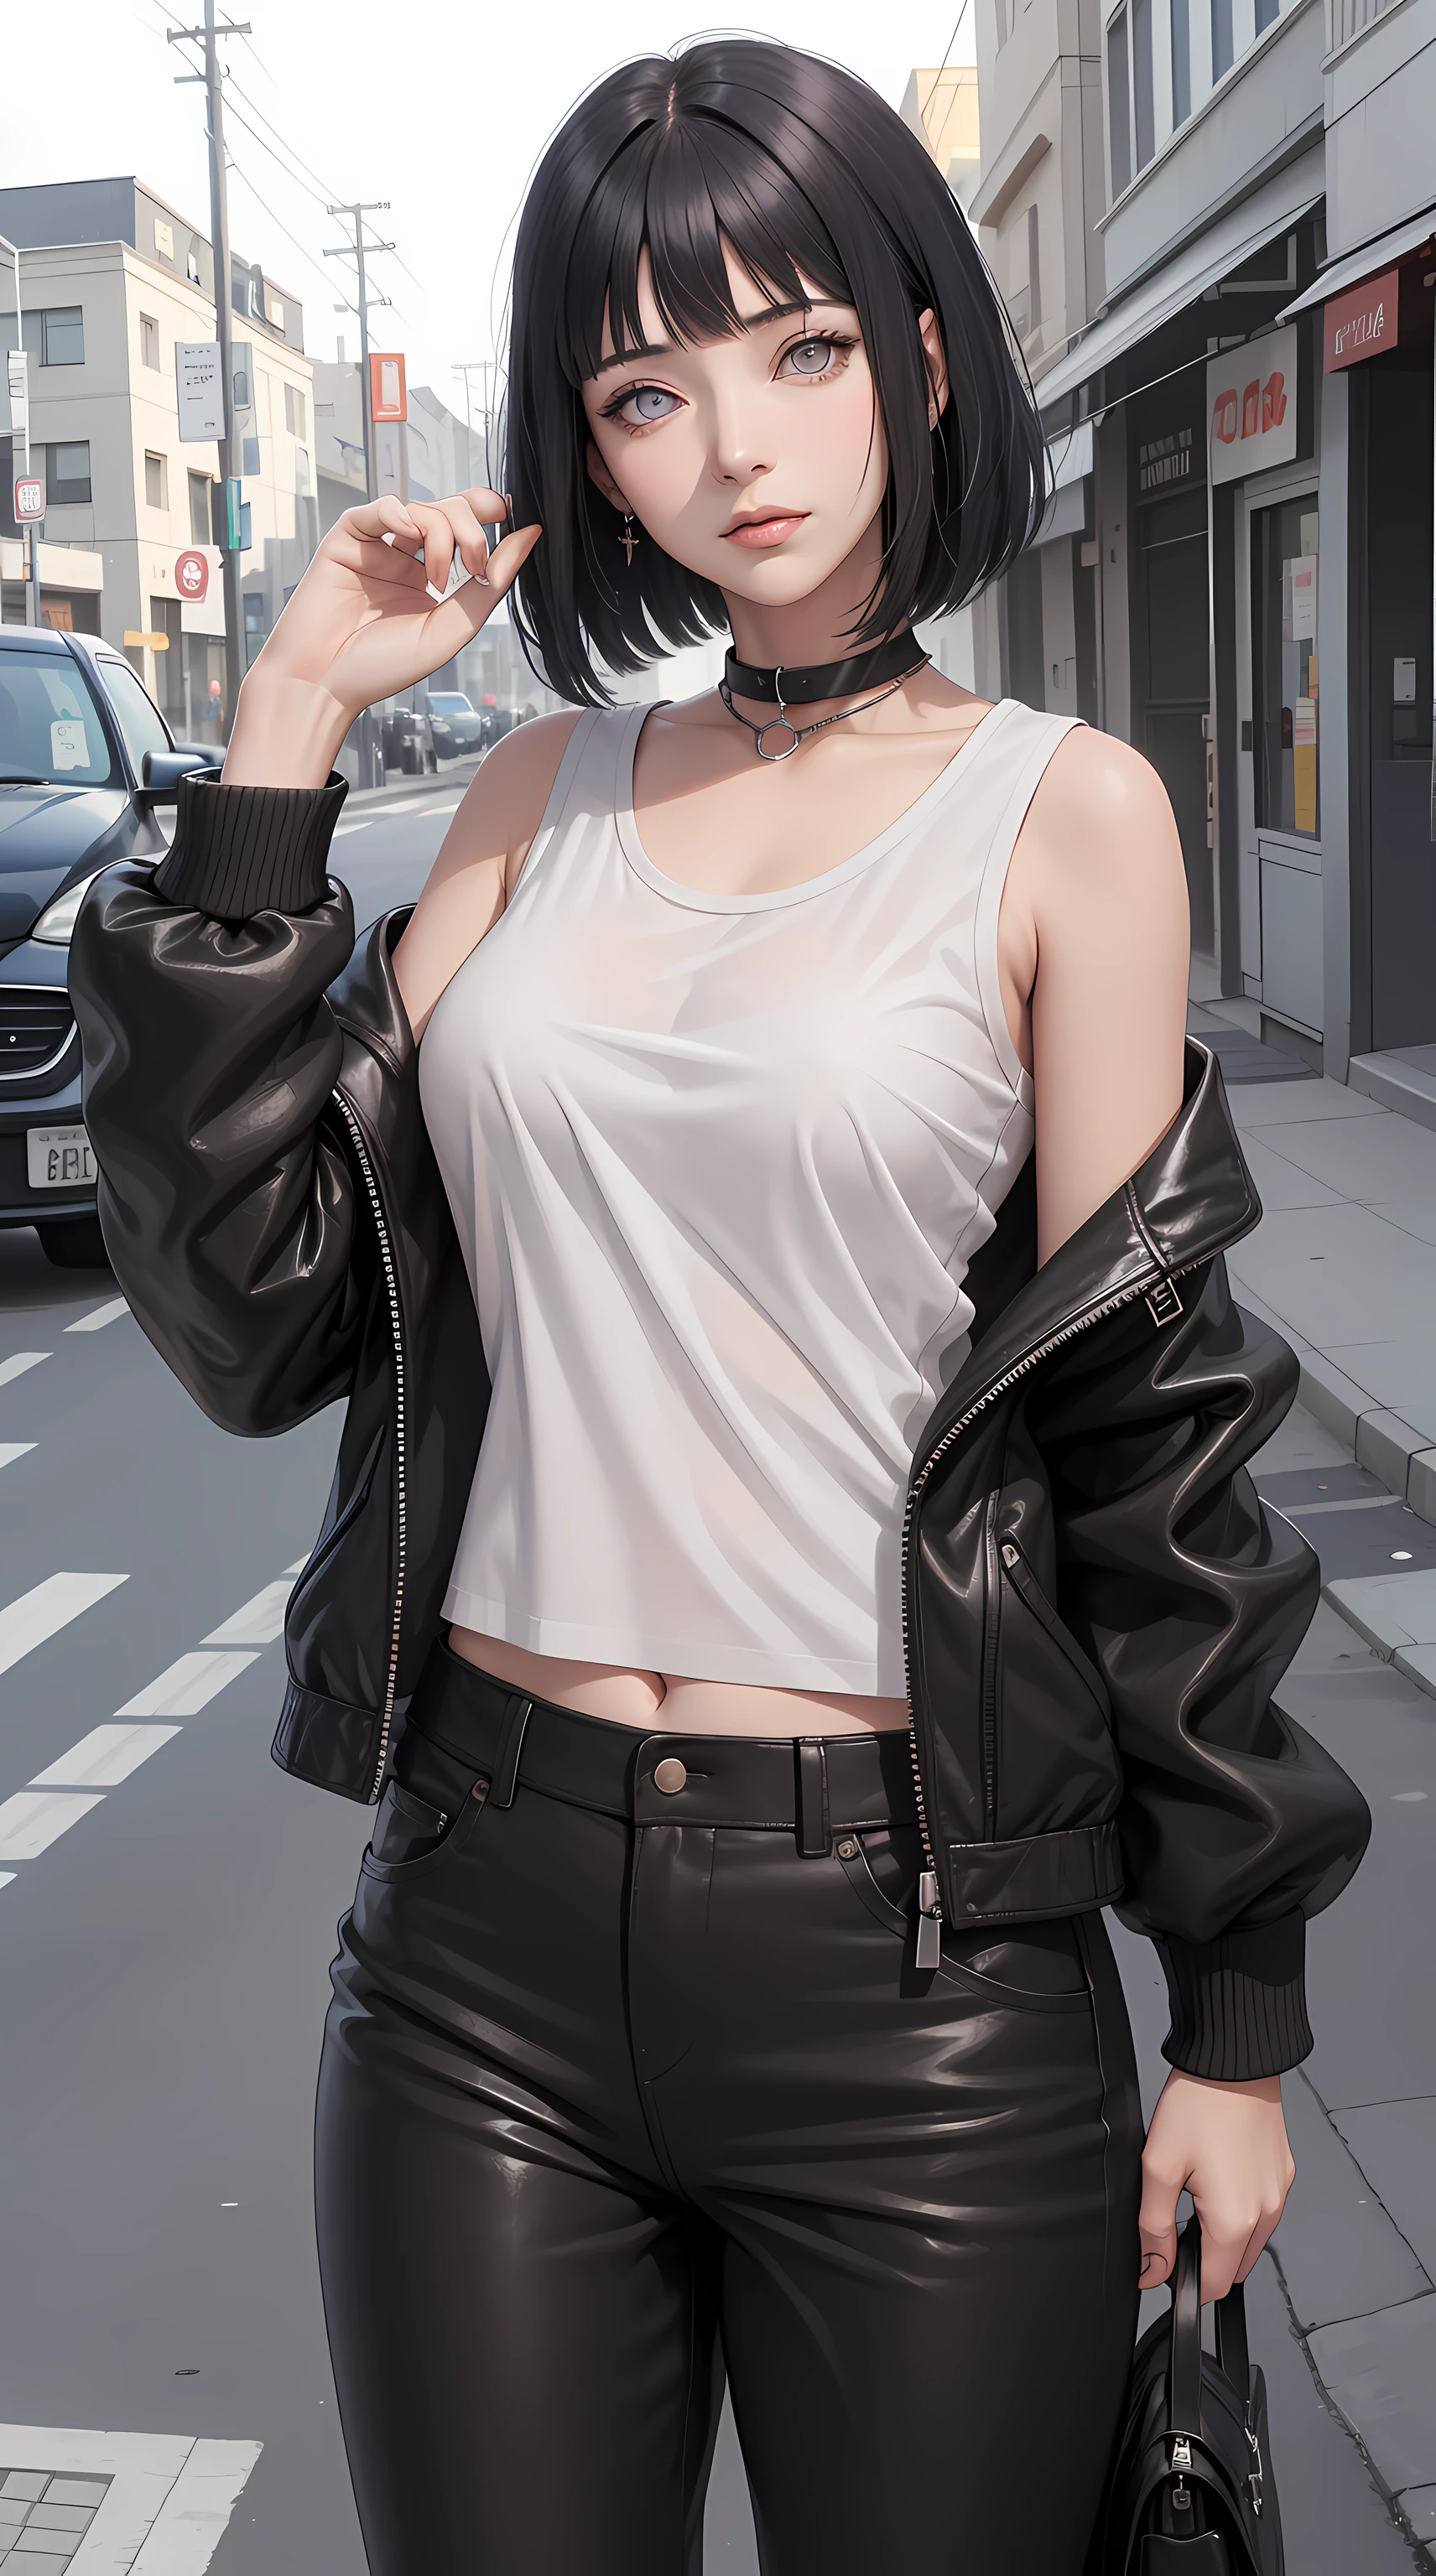 hinata\(boruto\), hinata from the anime naruto, light purple eyes, shoulder length hair, black hair, bangs, beautiful, beautiful woman, perfect body, perfect breasts, wearing a white t-shirt, black leather jacket, long black pants, cilak, jewelry, on the street, roadside, at night, evening, looking at the viewer, a slight smile, realism, masterpiece, textured leather, super detail, high detail, high quality, best quality, 1080p, 16k